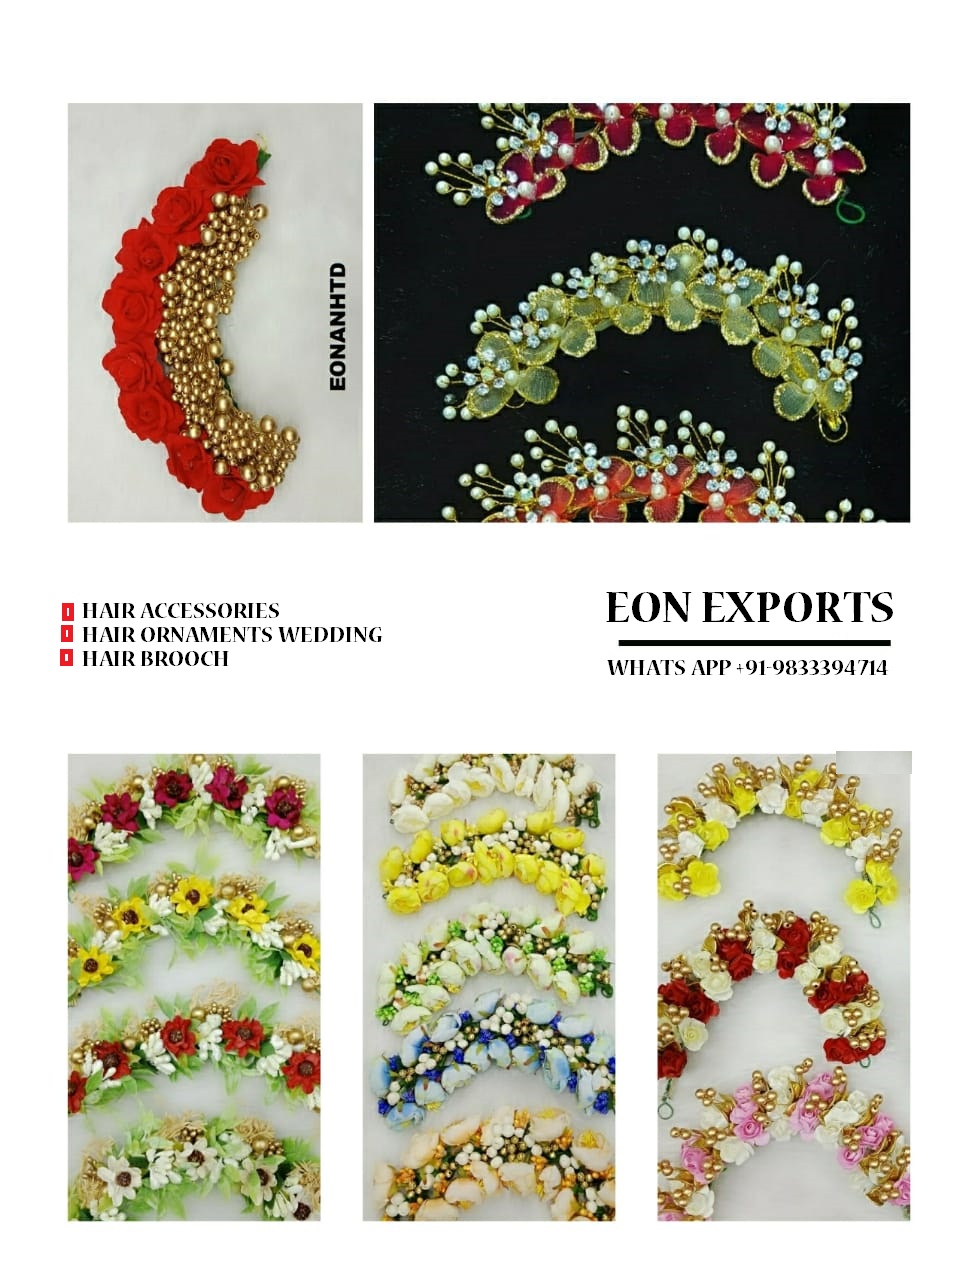 Hair Accessories - Manufacturers, Suppliers in Bangalore